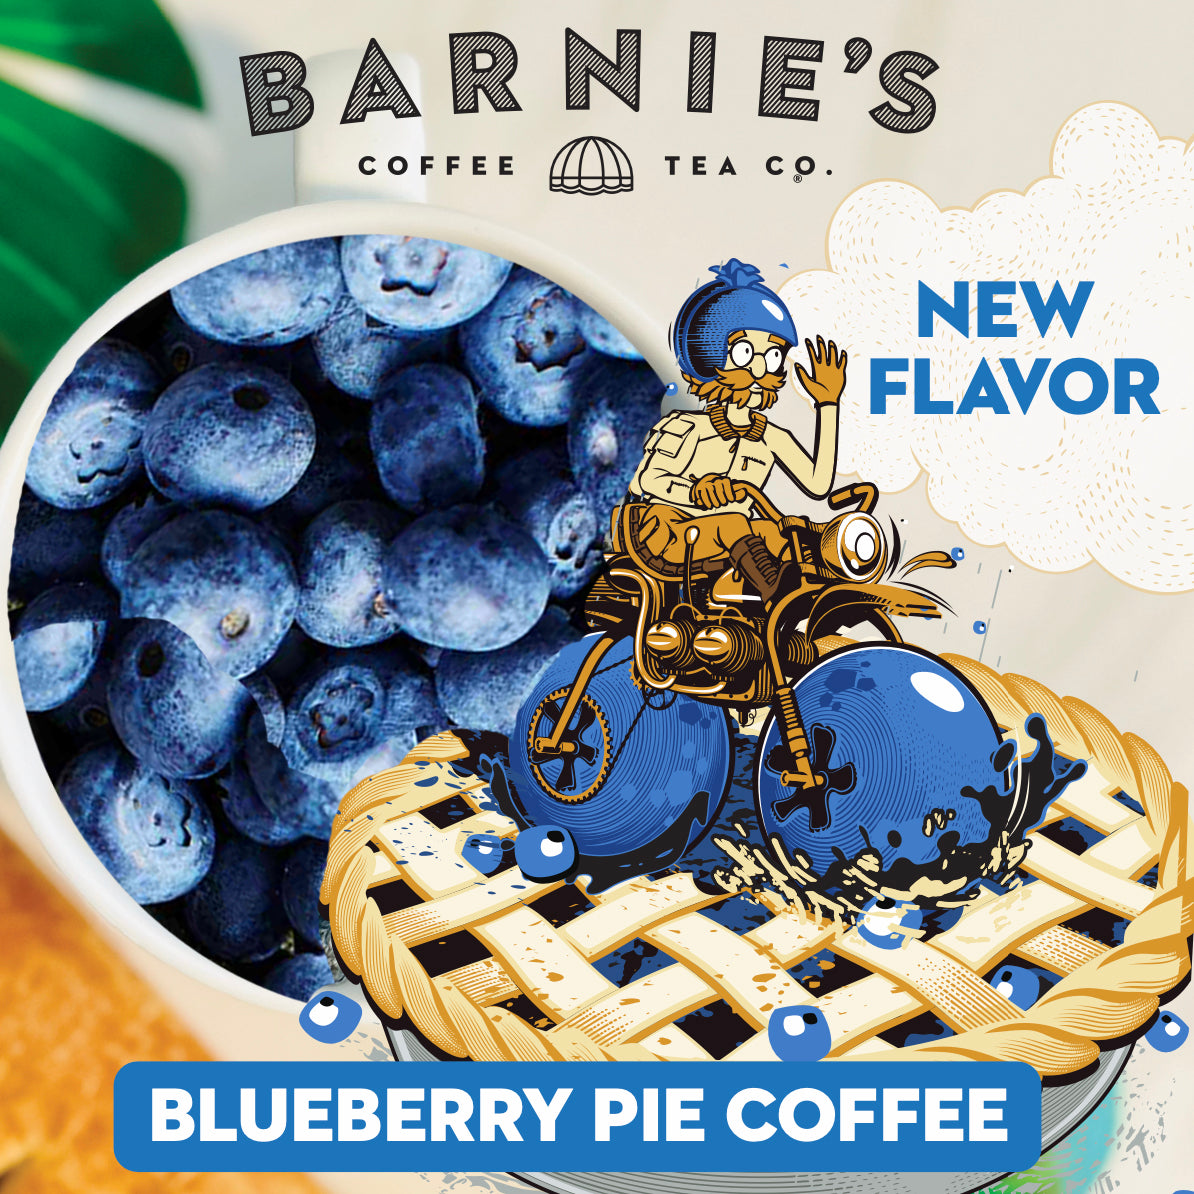 Limited Time Only Blueberry Pie Flavored Coffee - The Story Behind the Beans